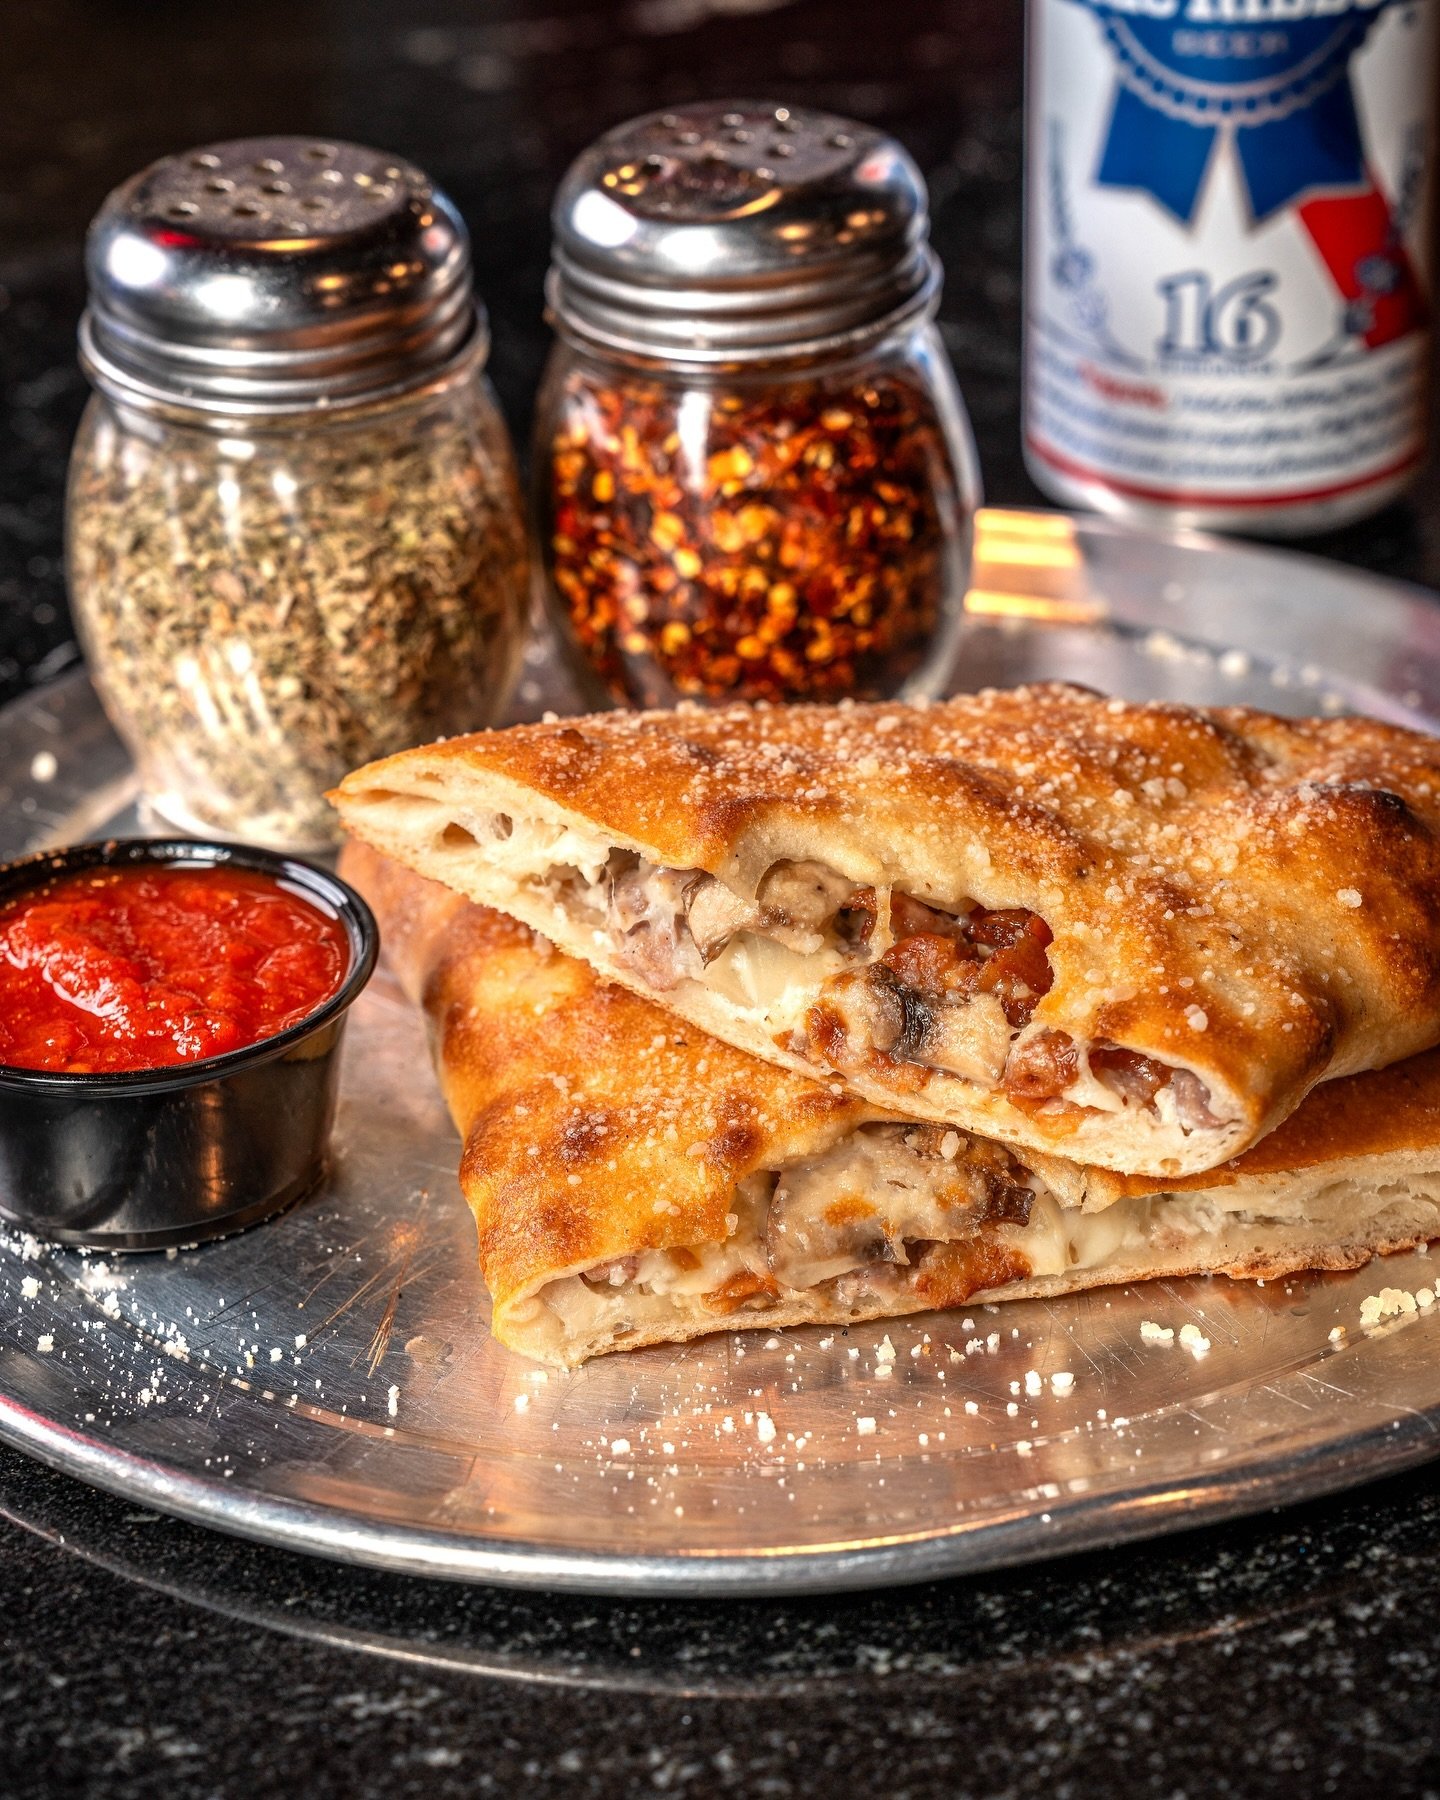 What if we took your favorite pie...and made it into a calzone?

For only a $1.50 more, get  a 10&rsquo;&rsquo; pie as a calzone!

As always, you can customize your calzone or get a customer-favorite like the Chicken Florentine Calzone!

Order one fo